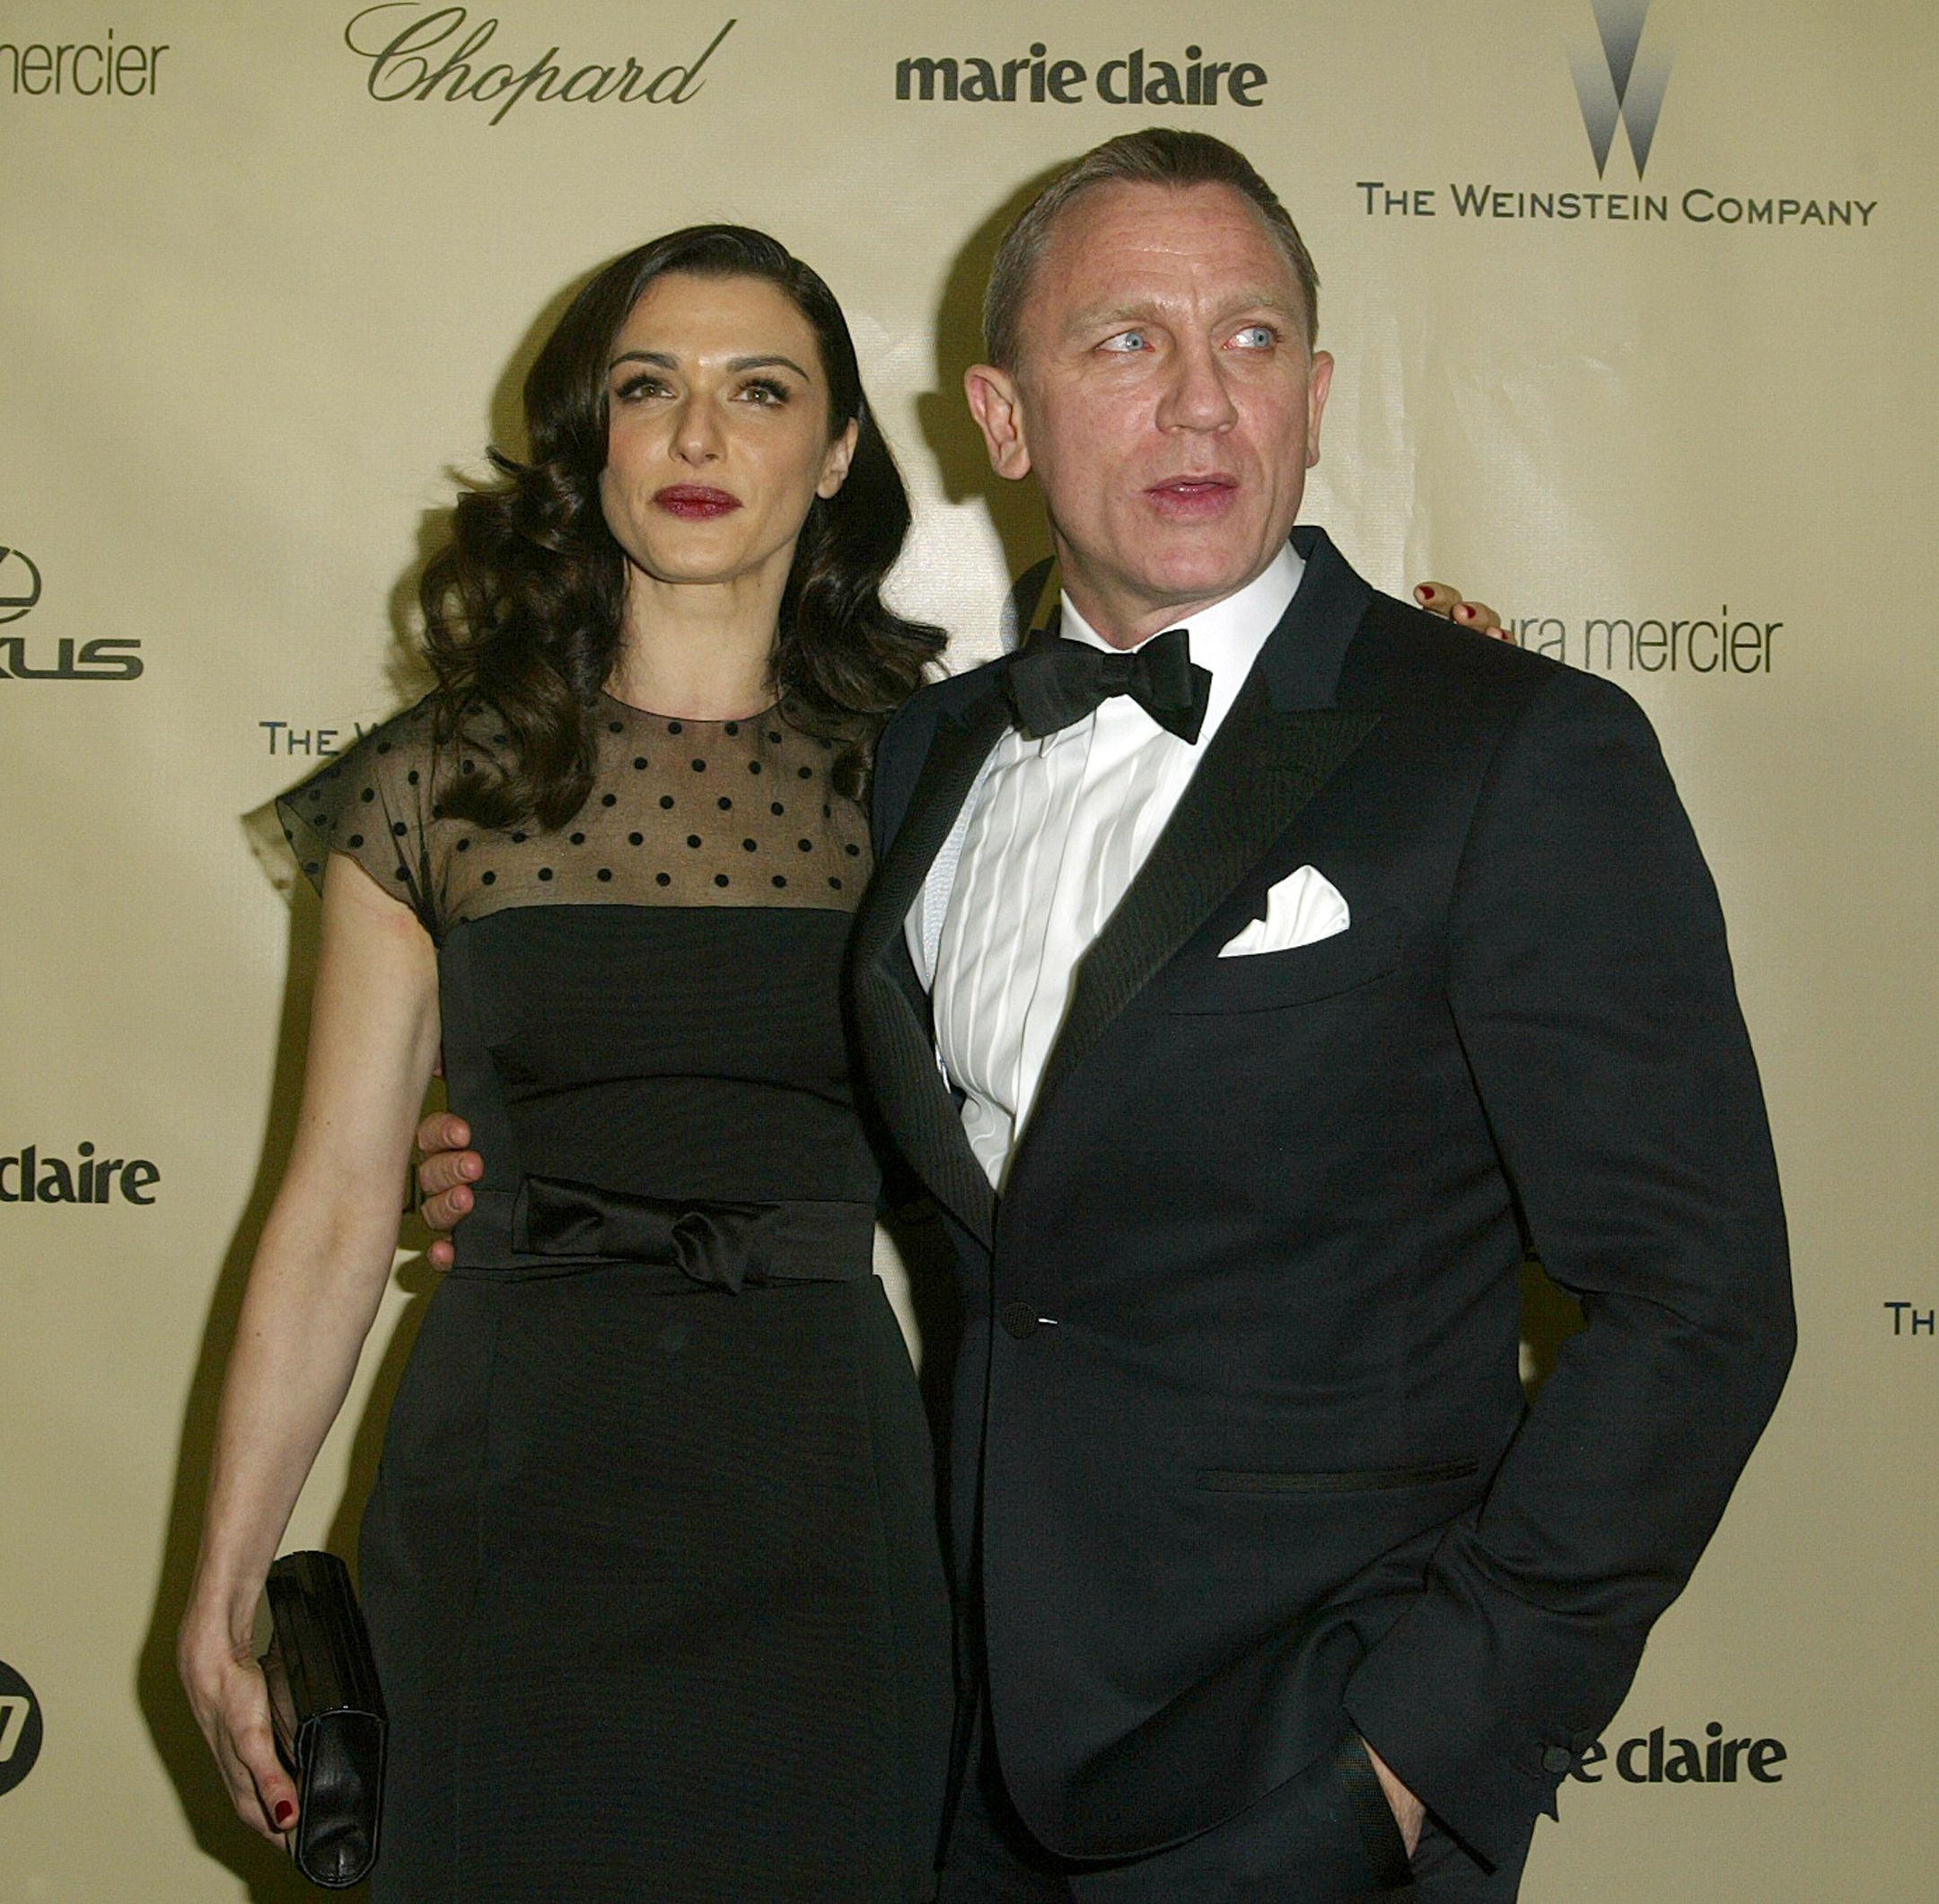 BEVERLY HILLS, CA - JAN. 13: Rachel Weisz & Daniel Craig arrive at the Weinstein Company's 2013 Golden Globes After Party on Sunday, January 13, 2013 at the Beverly Hilton Hotel in Beverly Hills, CA.